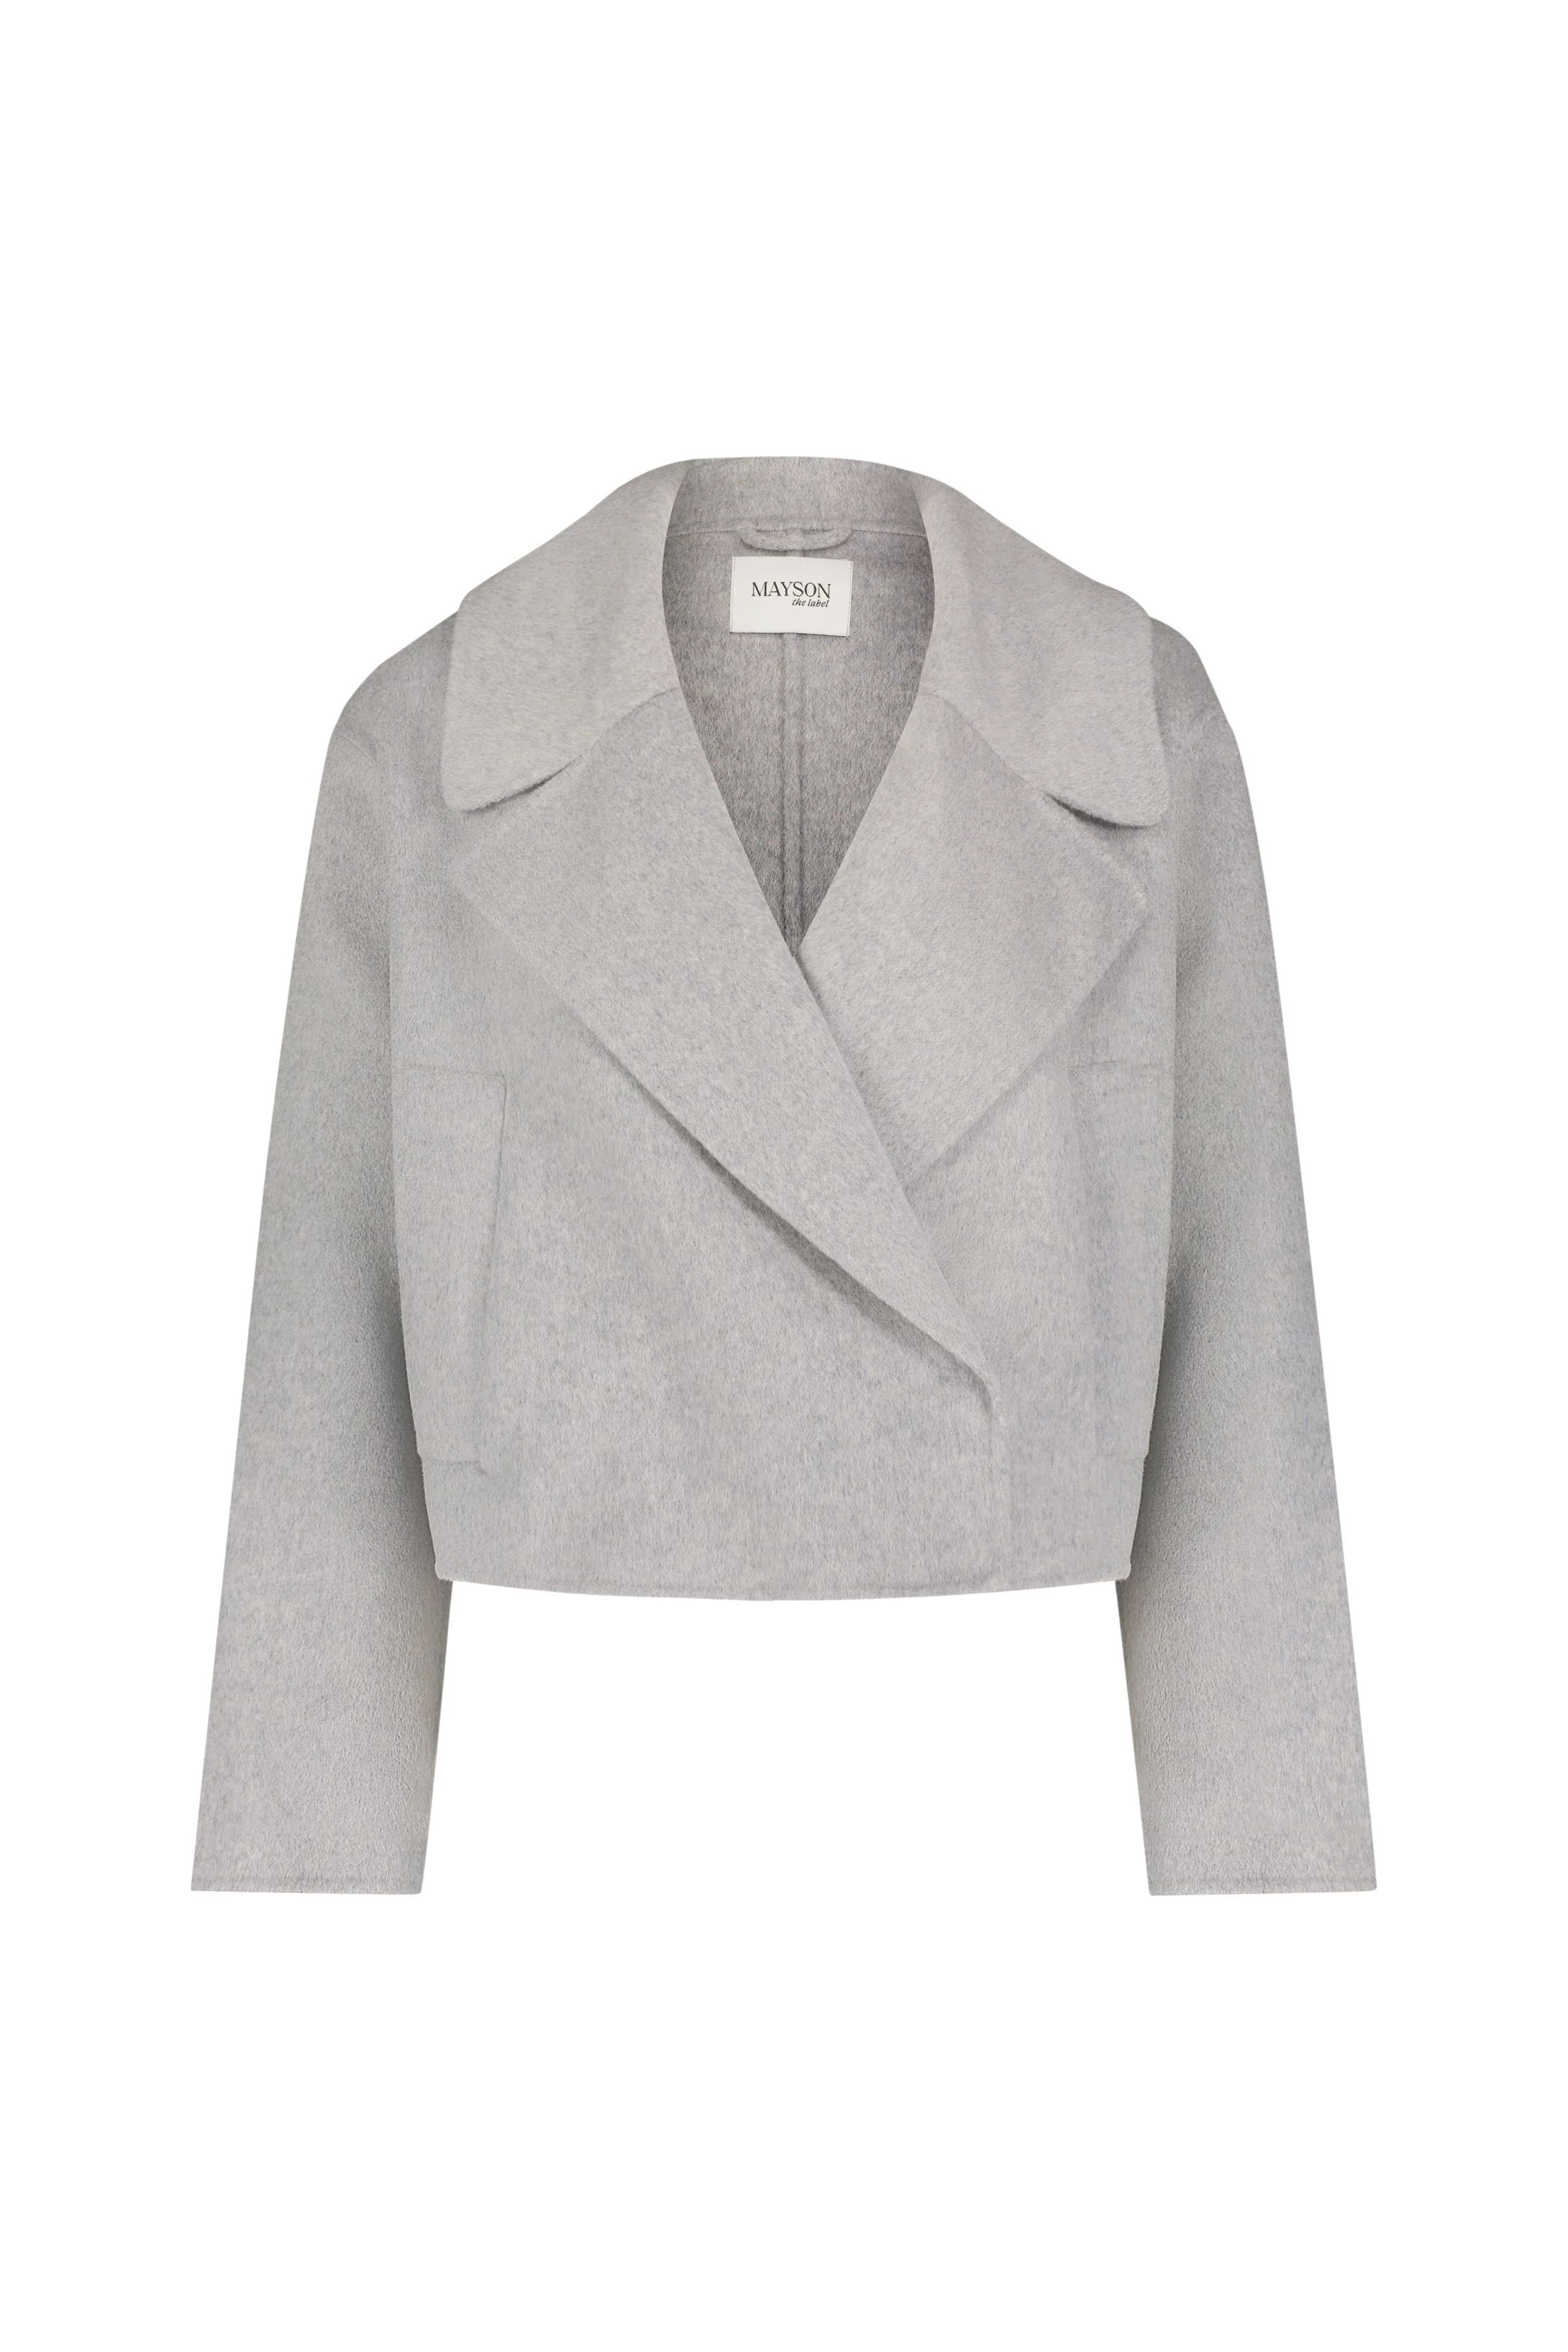 Wool Cashmere Double-Faced Coat | MAYSON the label